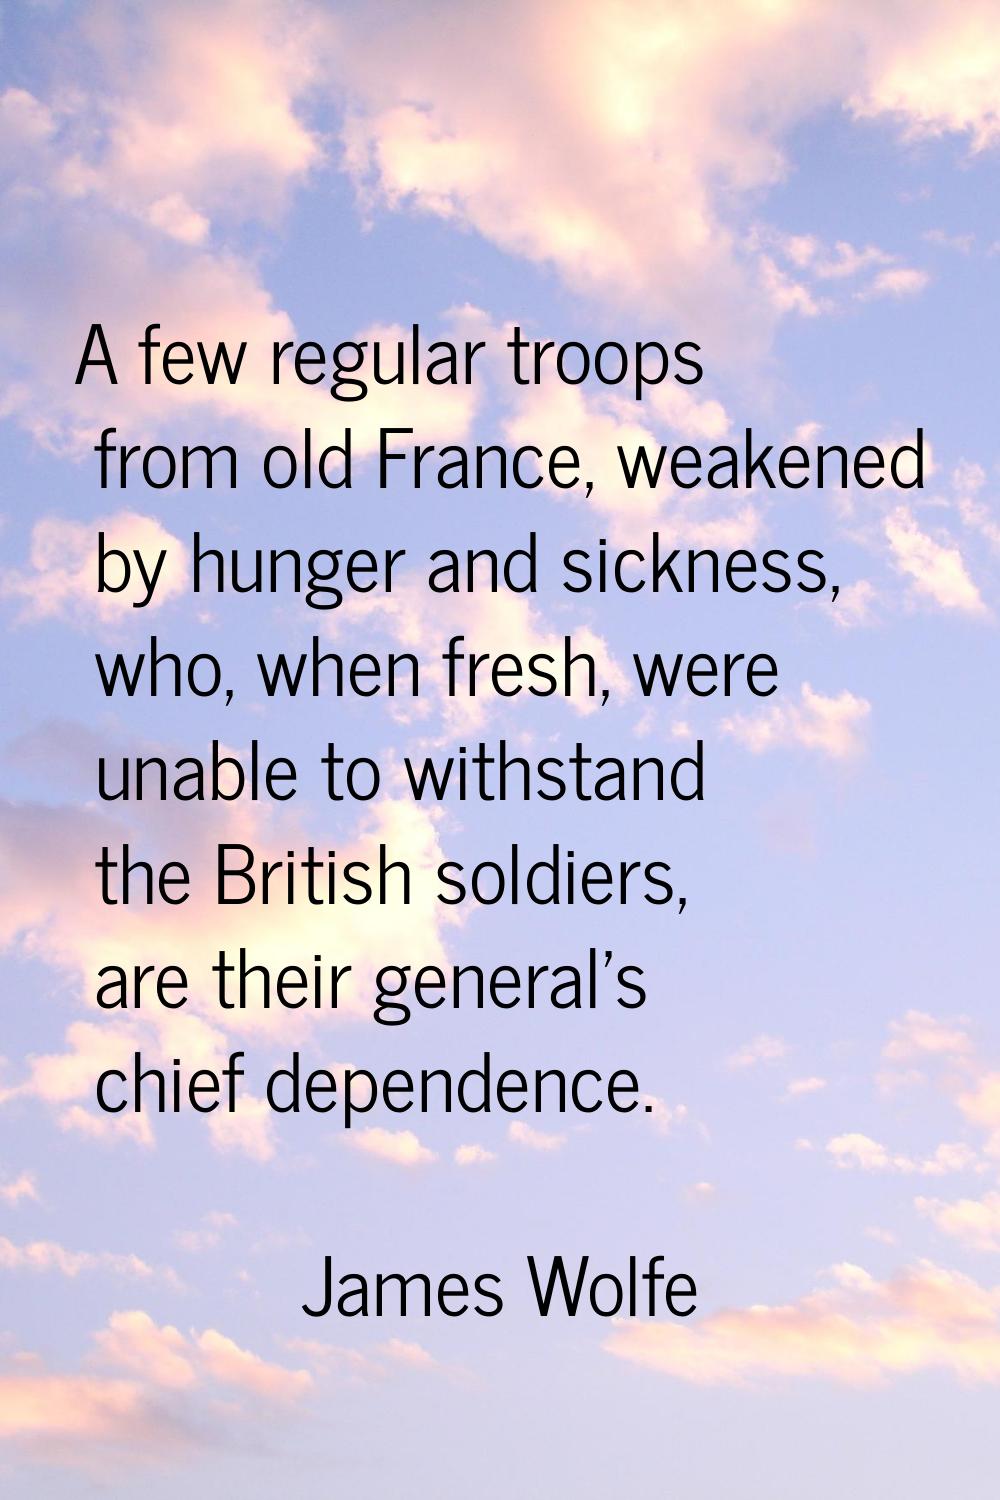 A few regular troops from old France, weakened by hunger and sickness, who, when fresh, were unable